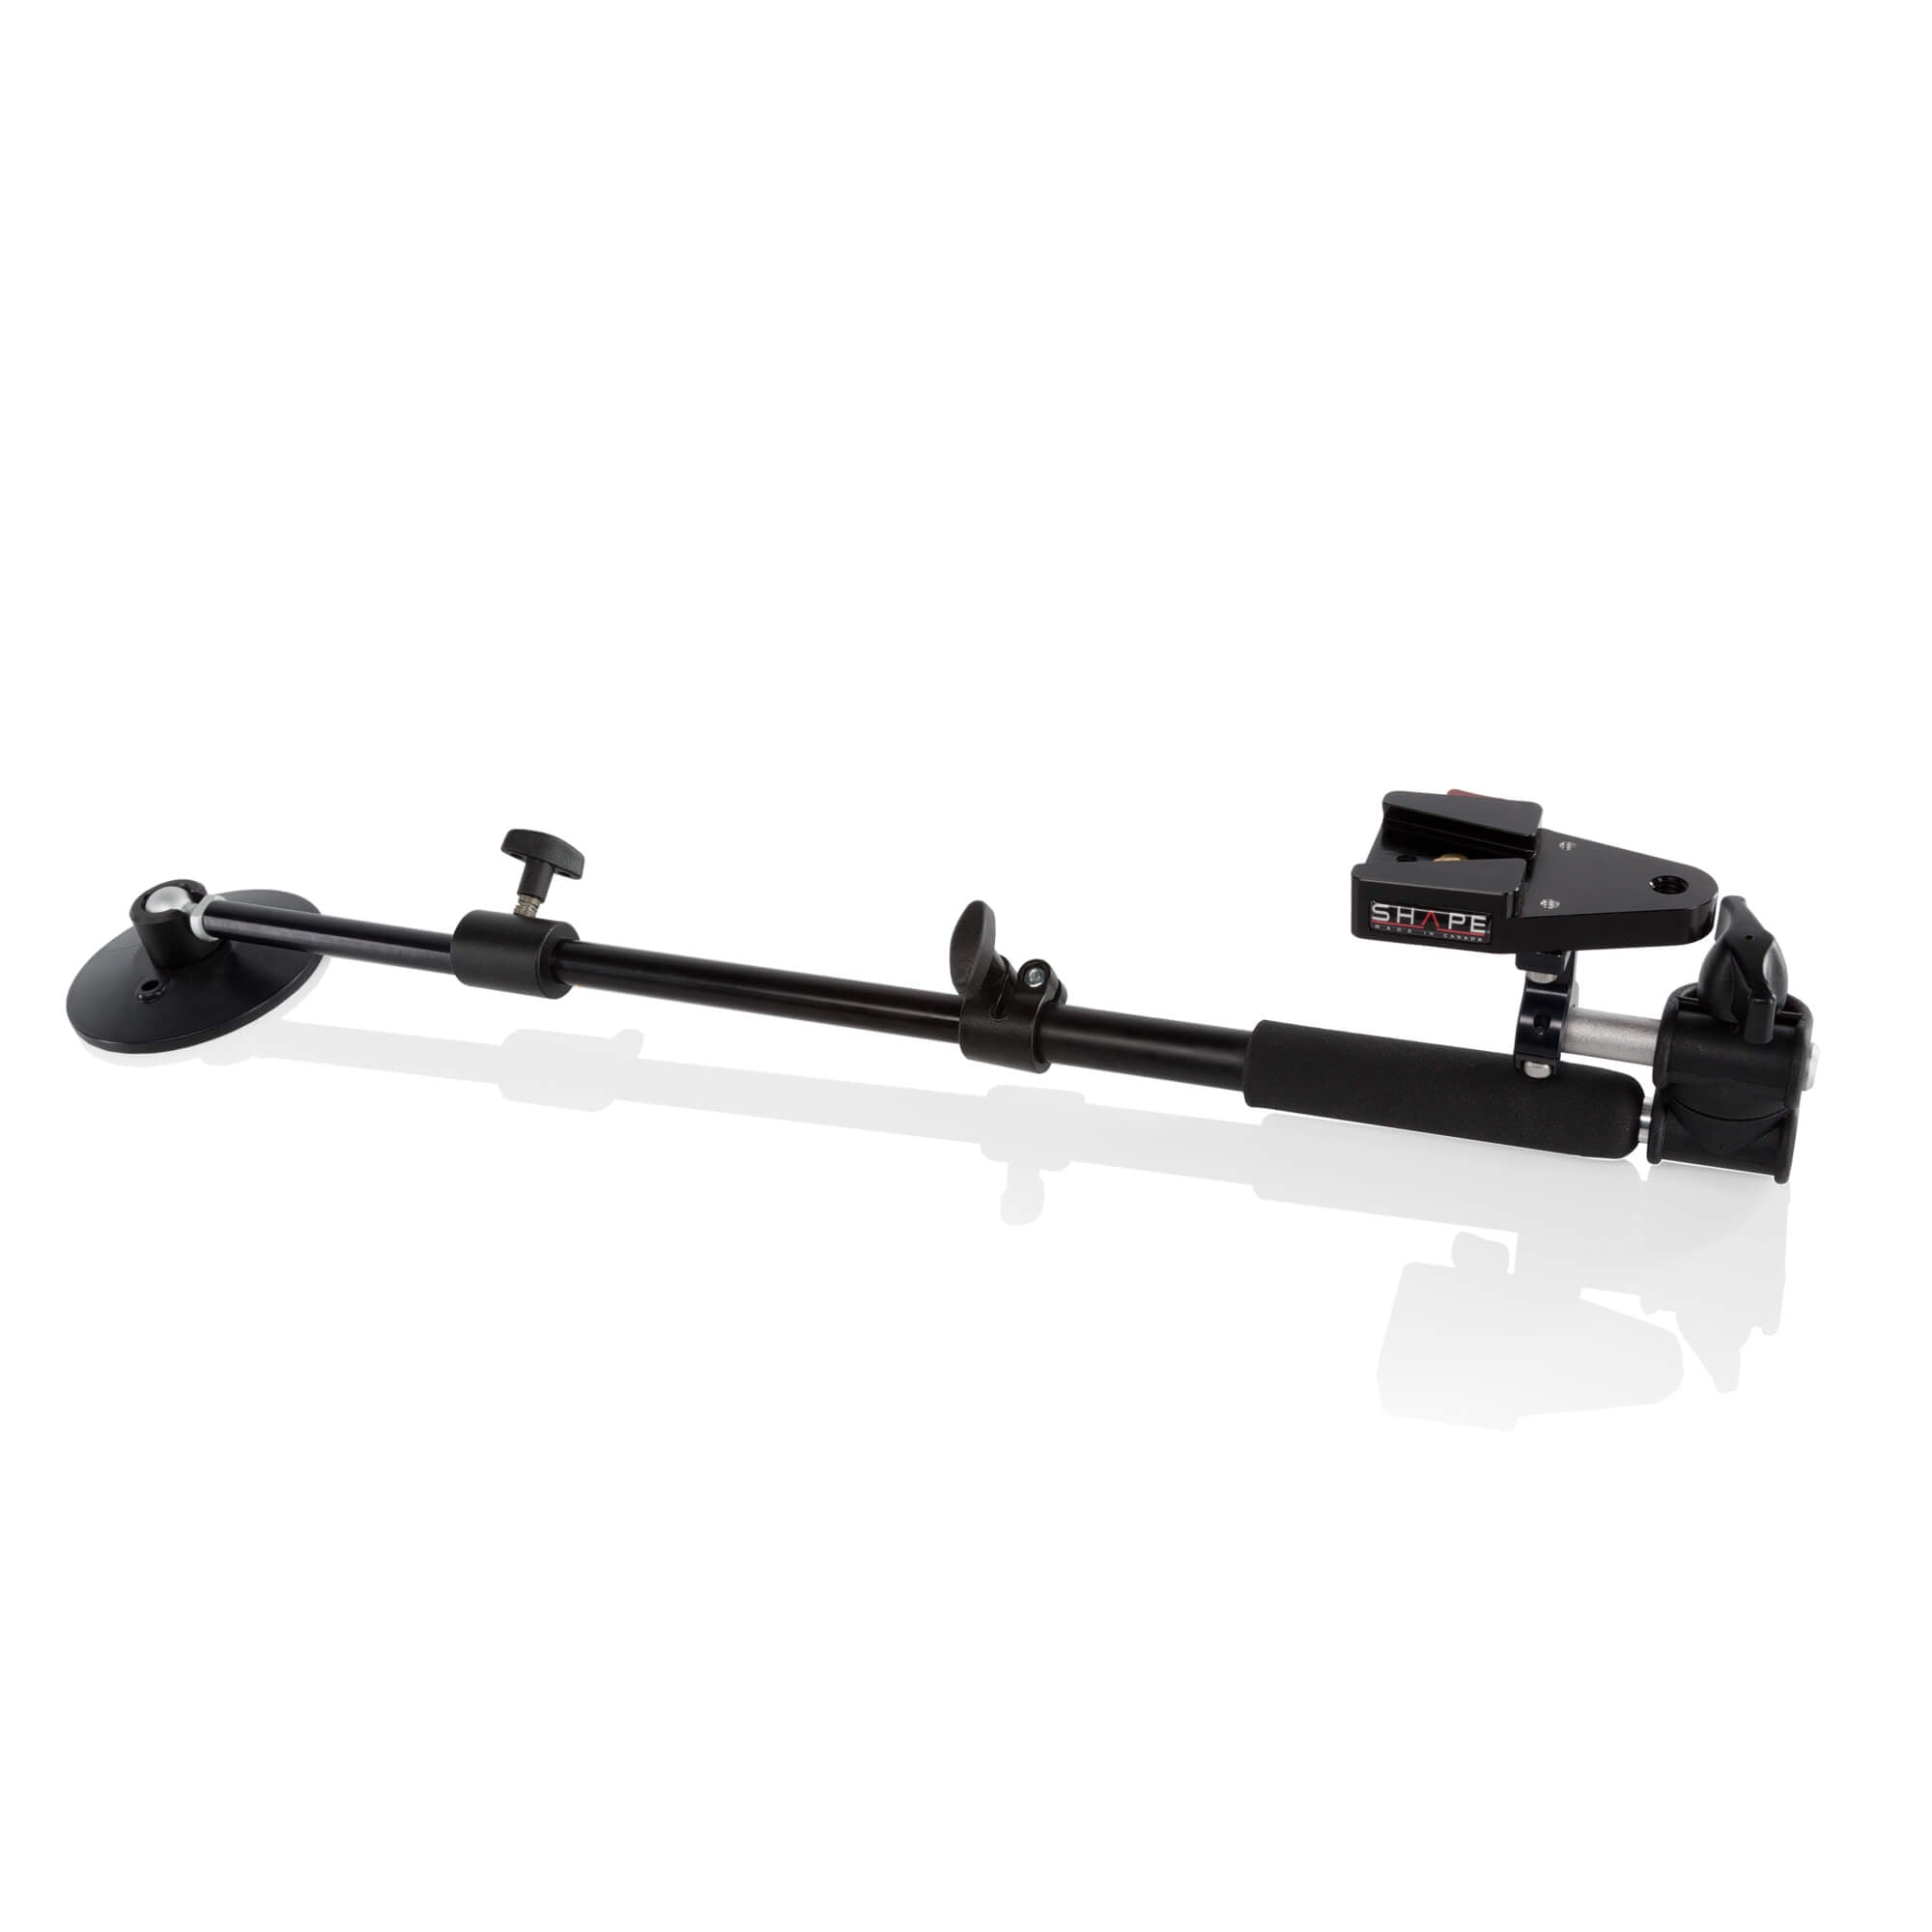 SHAPE Telescopic Support Arm with Rod Bloc and Quick Plate